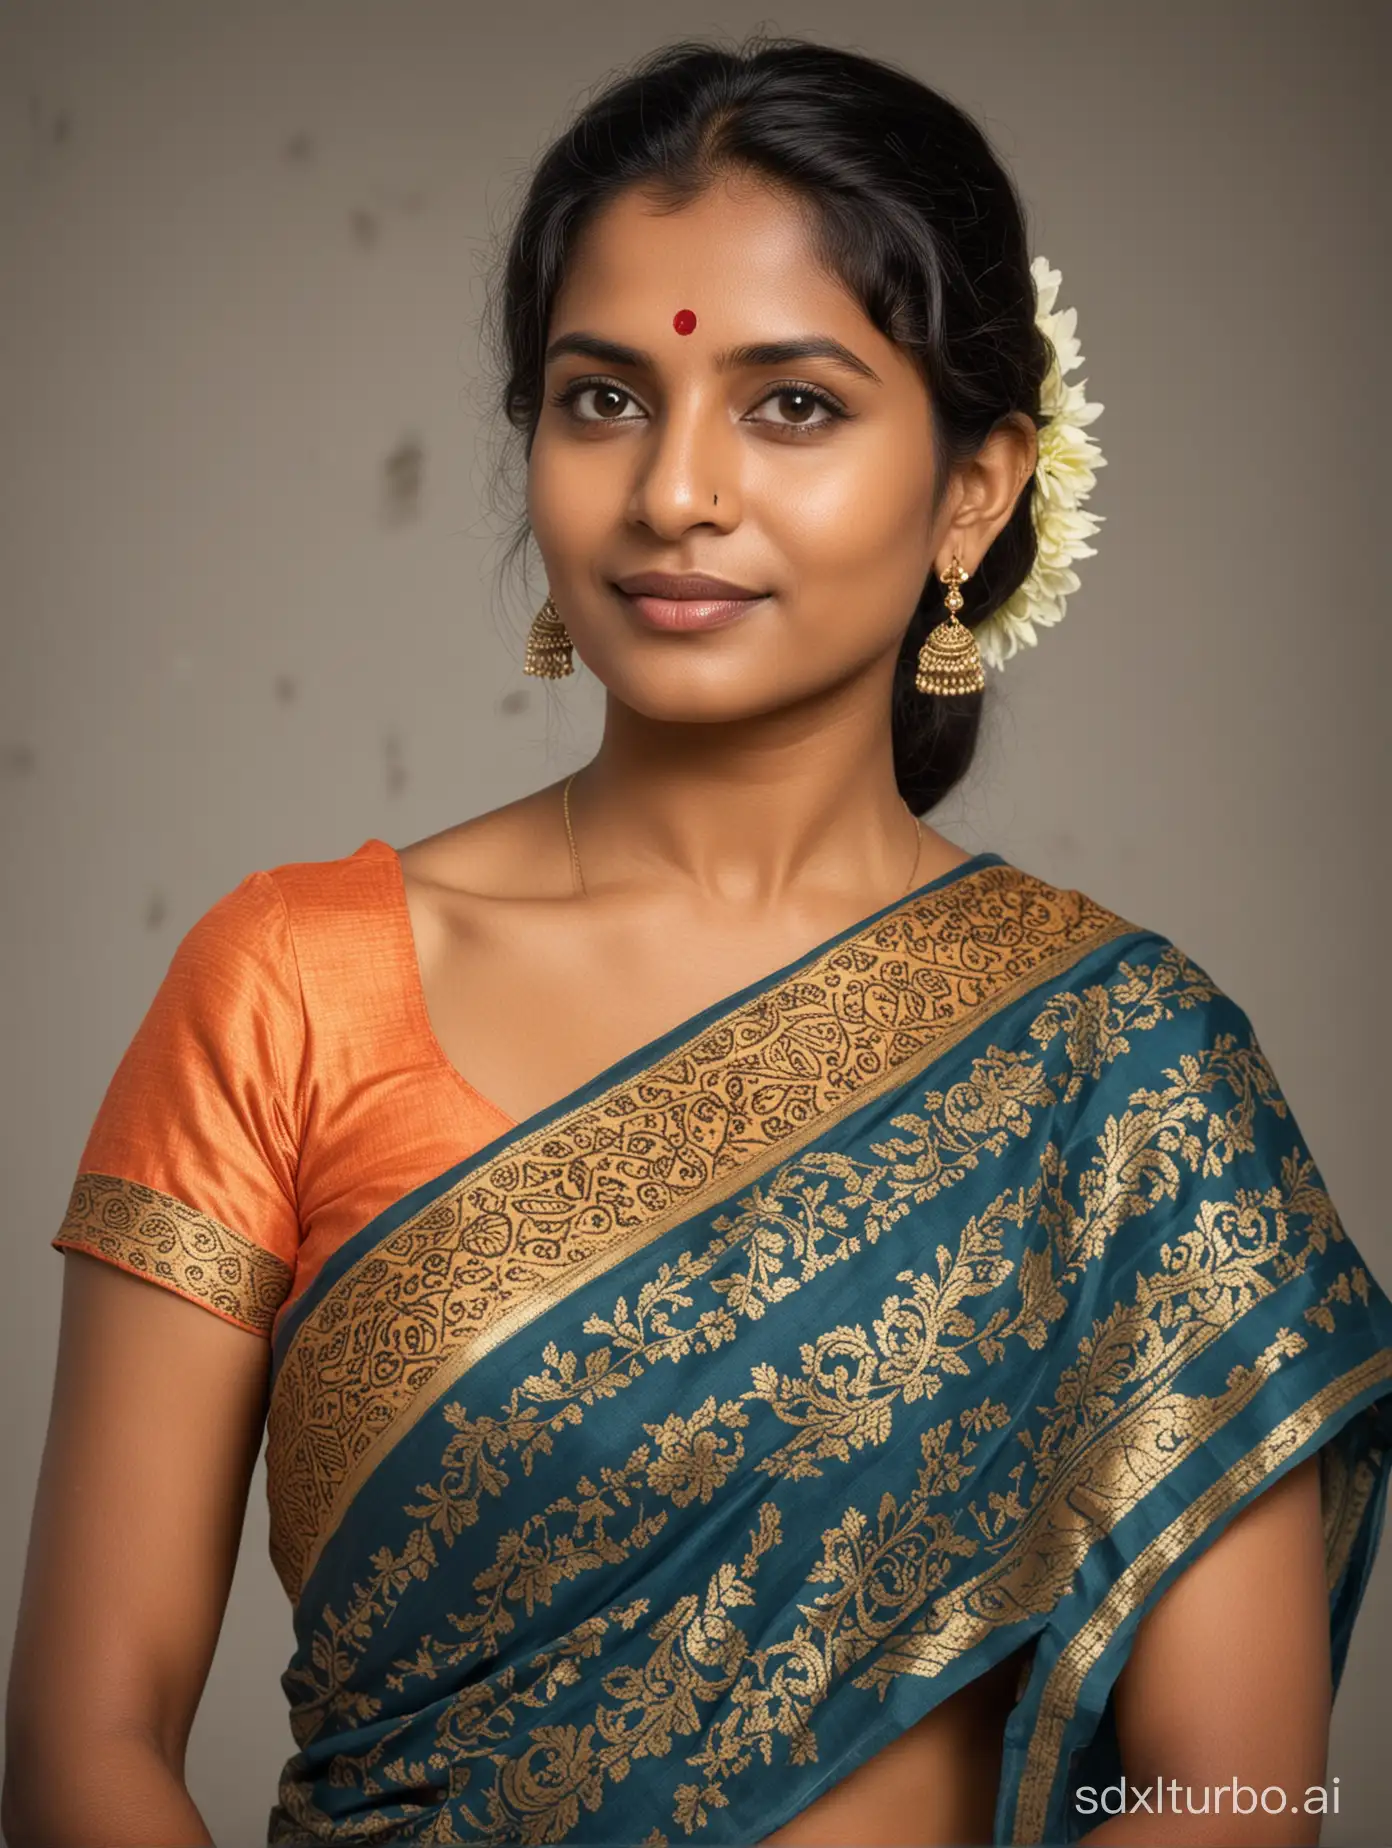 HighQuality-Portrait-Photography-of-a-Sri-Lankan-Woman-in-Traditional-Saree